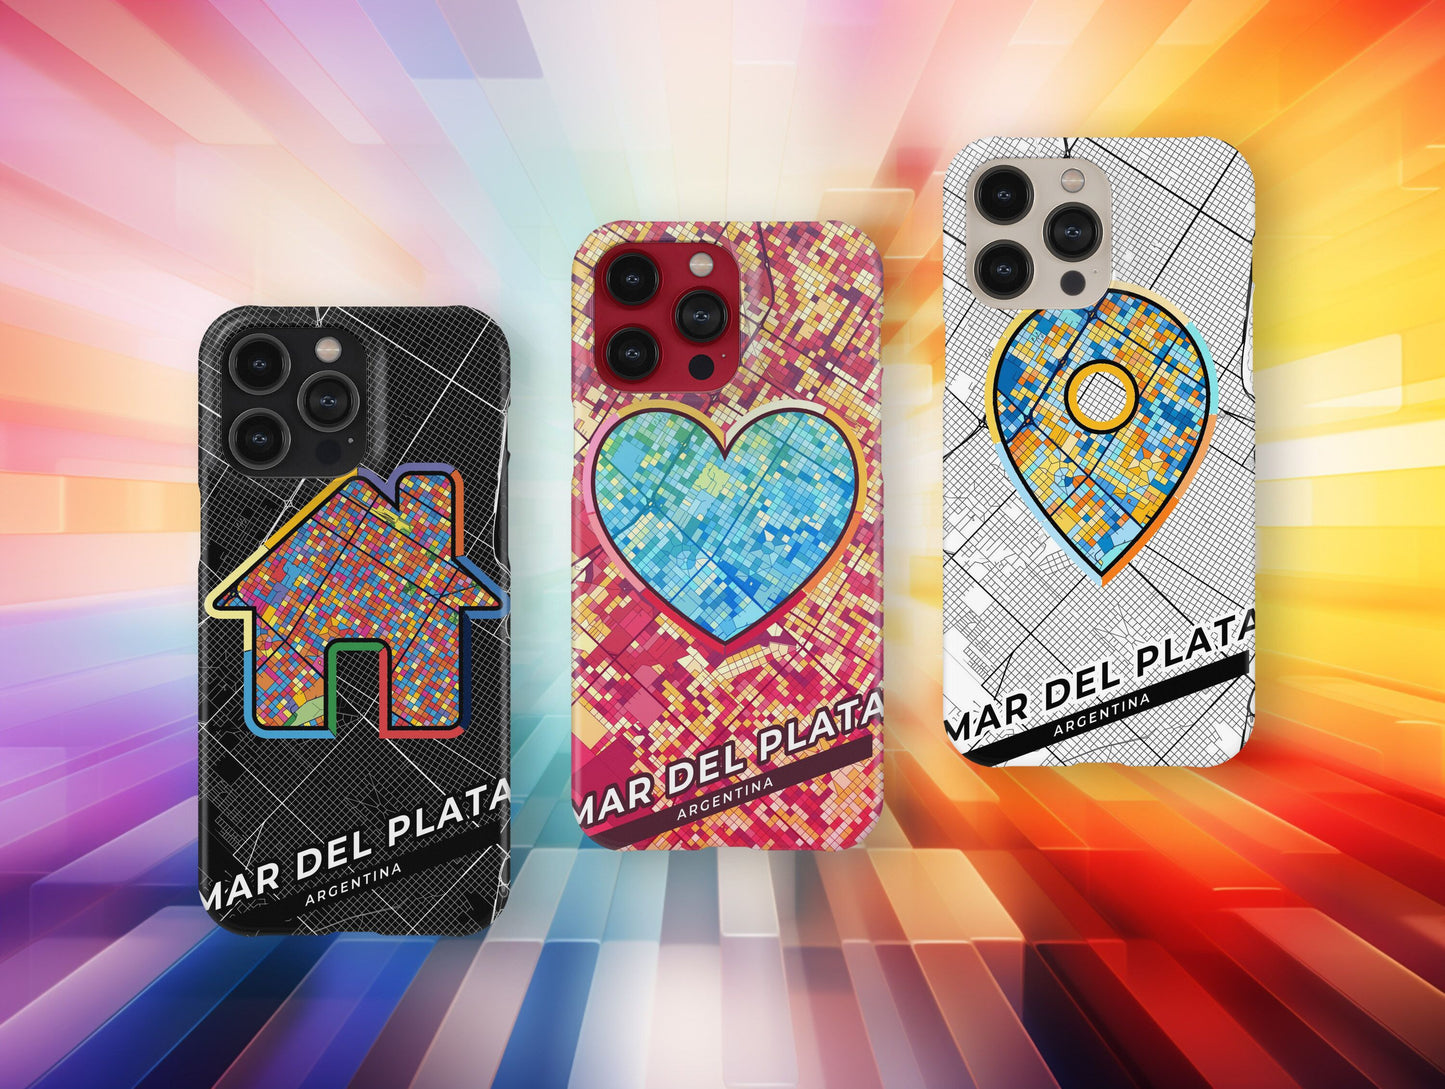 Mar Del Plata Argentina slim phone case with colorful icon. Birthday, wedding or housewarming gift. Couple match cases.